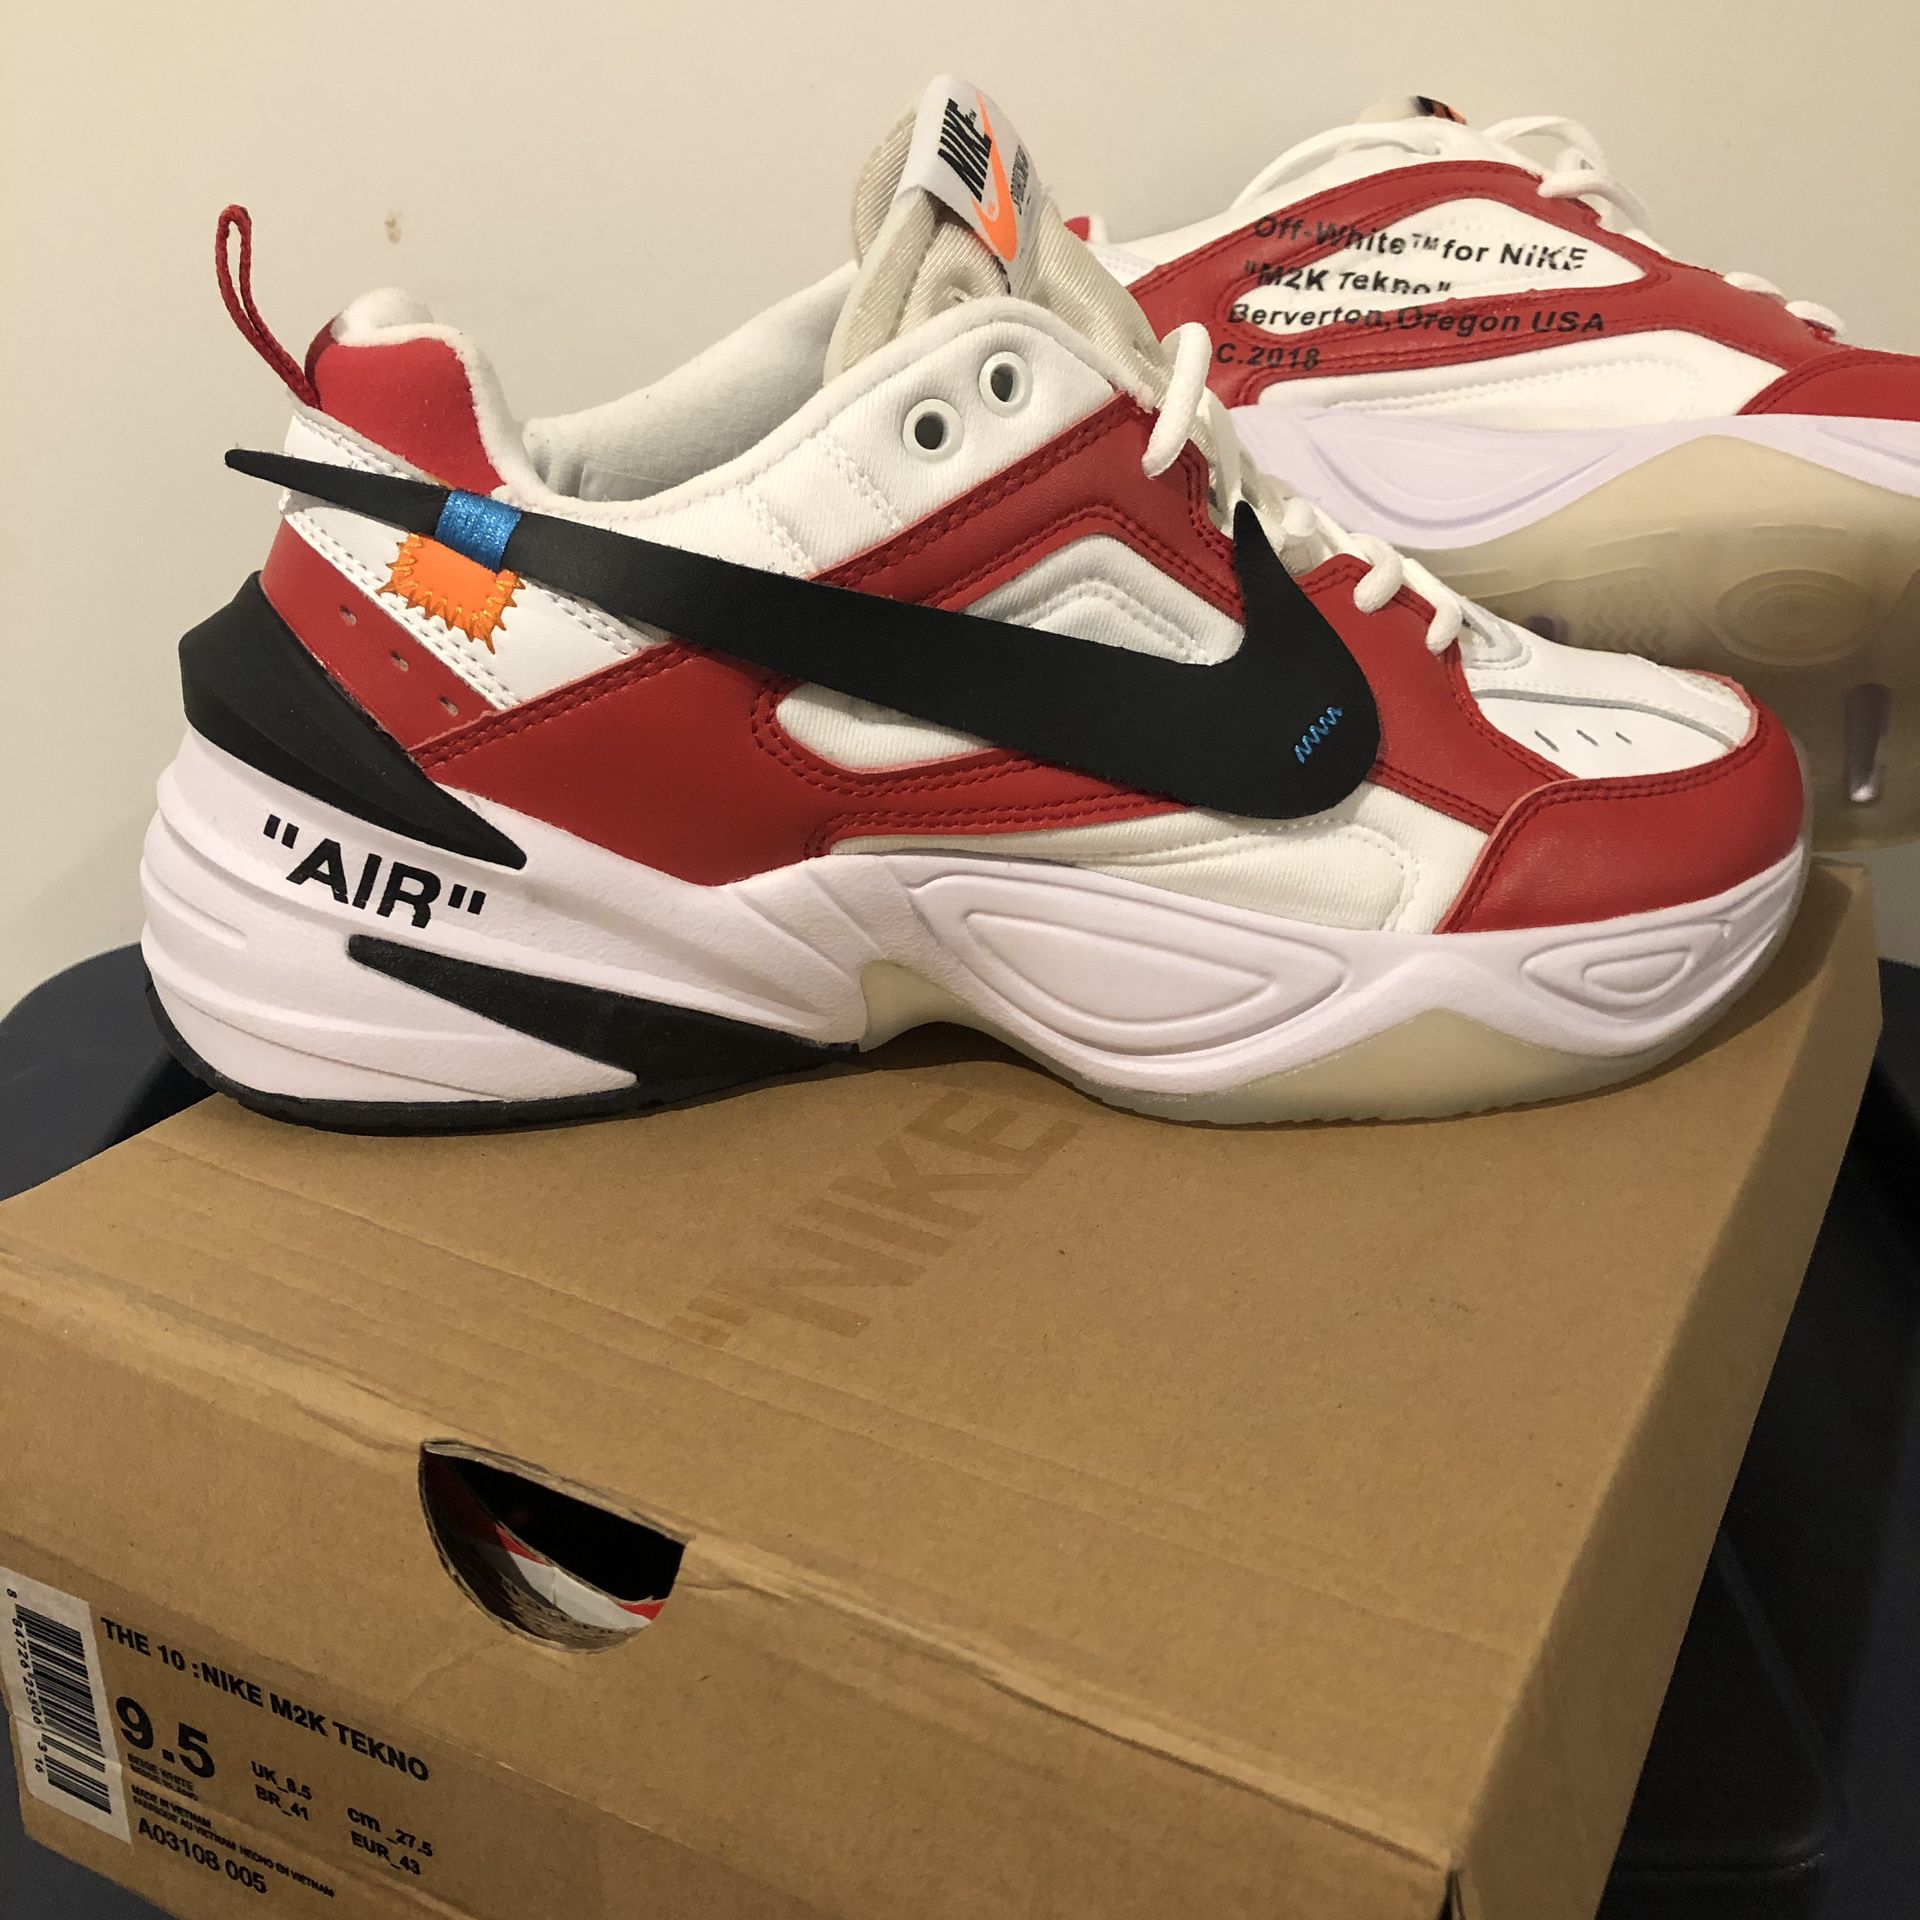 Nike retro air mk2 tekno us 9.5 new for Sale in Biscayne Park, FL - OfferUp